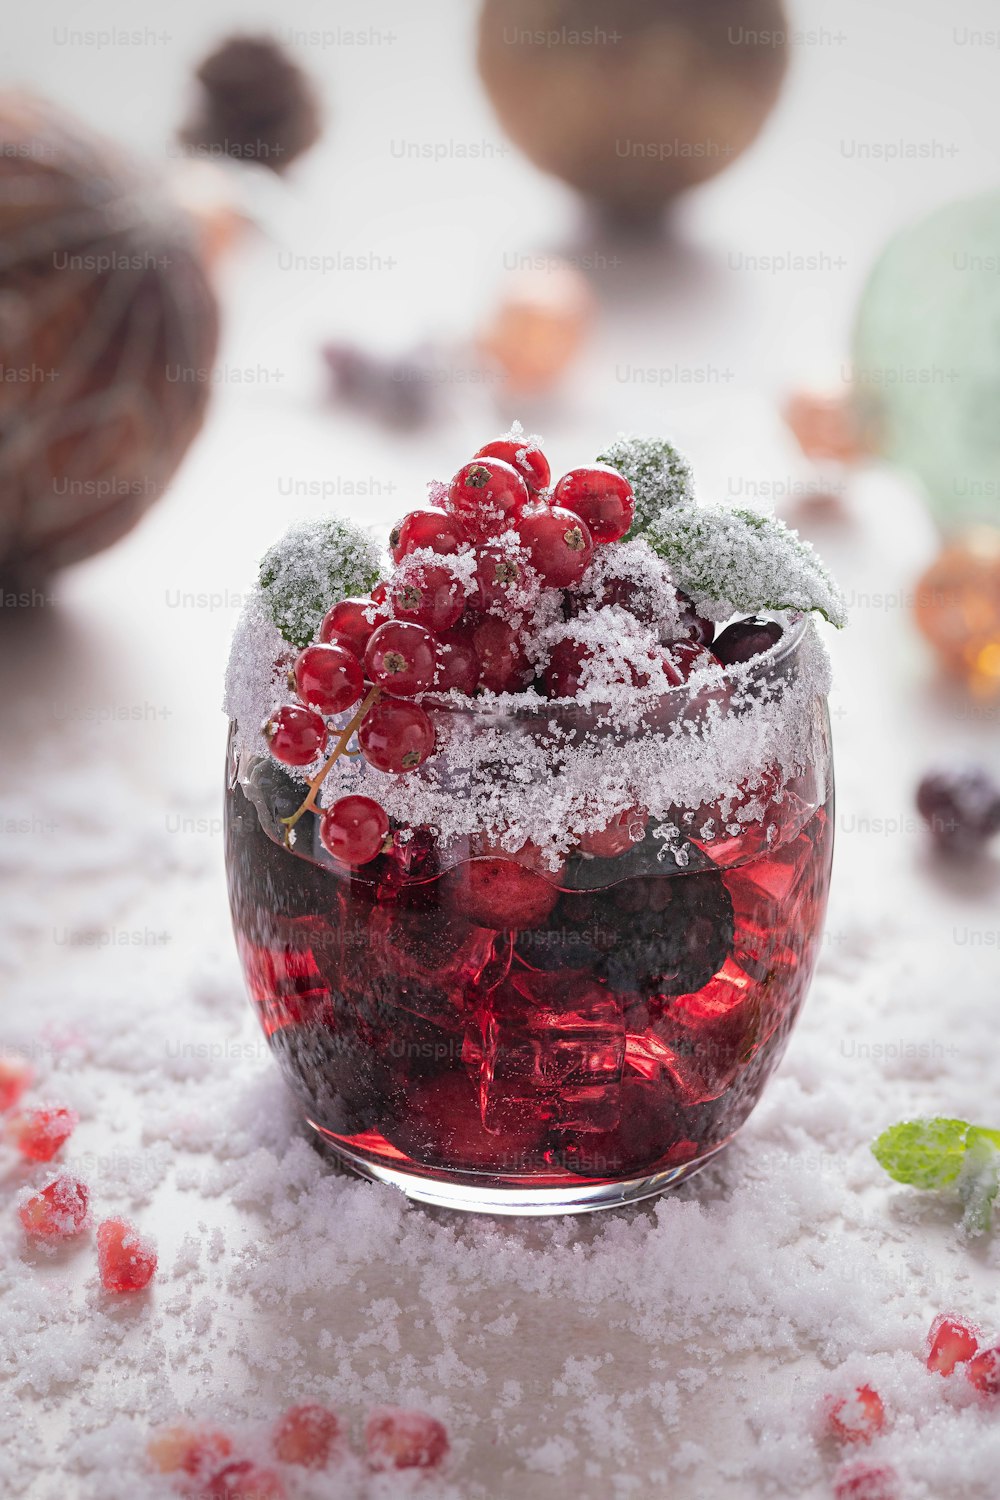 a small glass bowl filled with berries on top of snow